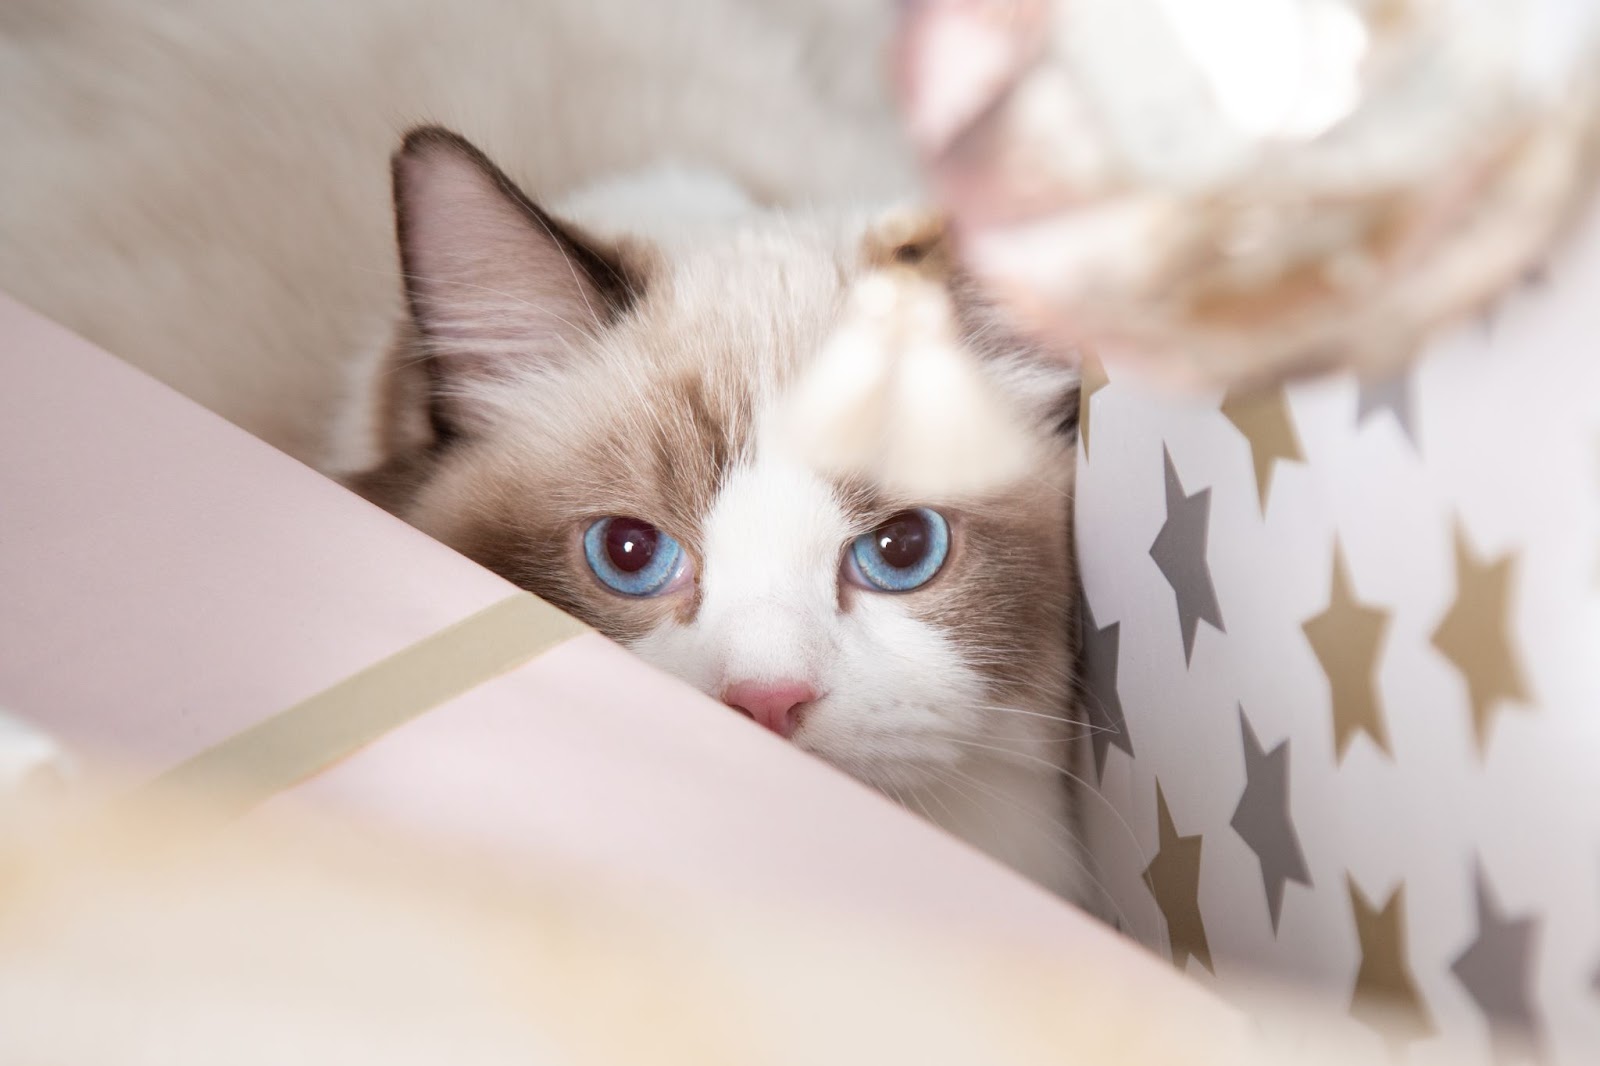 Why does my cat bring me gifts? - Sepicat